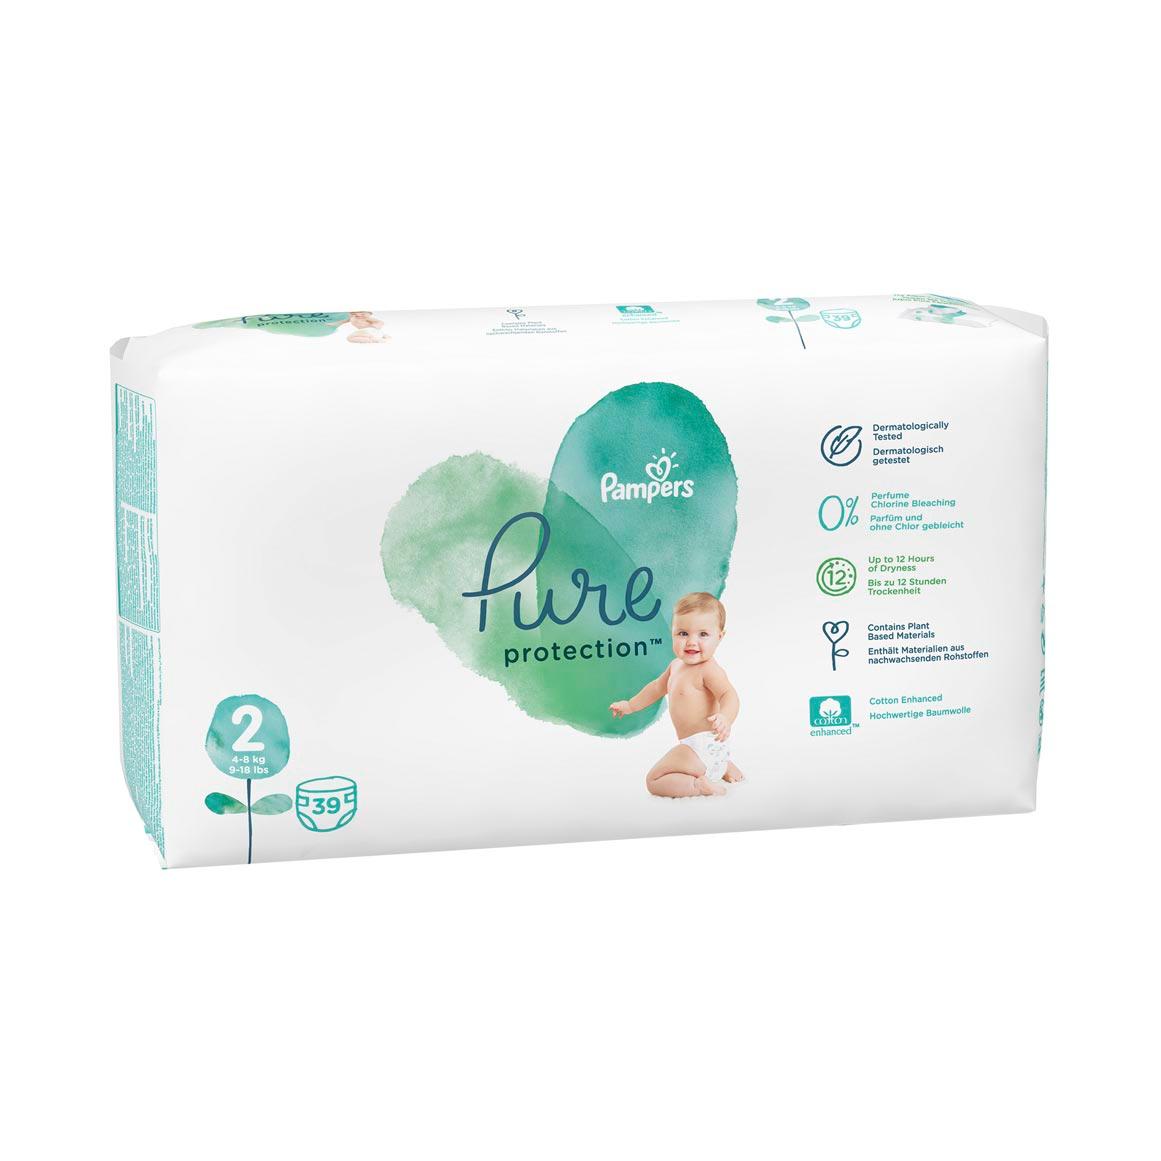 Pampers Pure Protection Size 2, 132 Nappies, 4-8 kg, Saving Pack, Made -  BRANDS CYPRUS